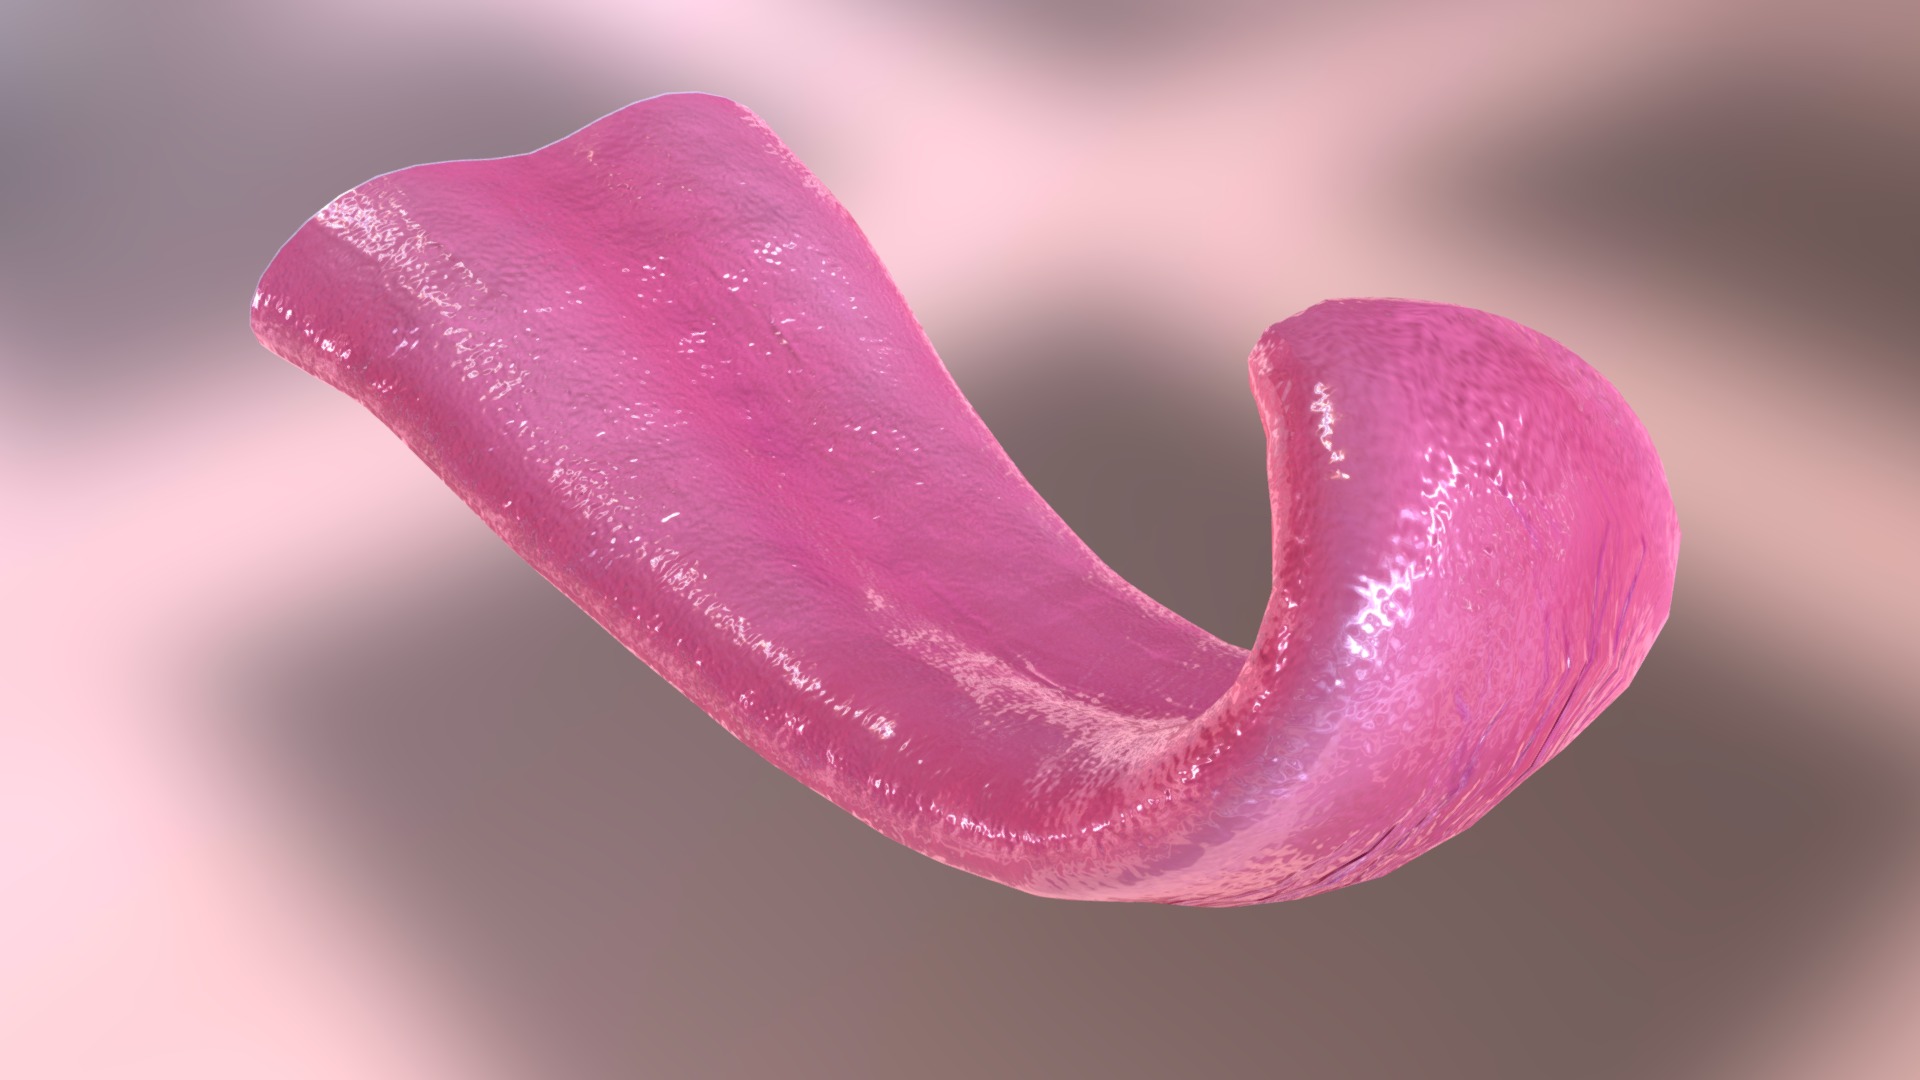 3D model La Langue – The tongue - This is a 3D model of the La Langue - The tongue. The 3D model is about a pink flower with water droplets on it.